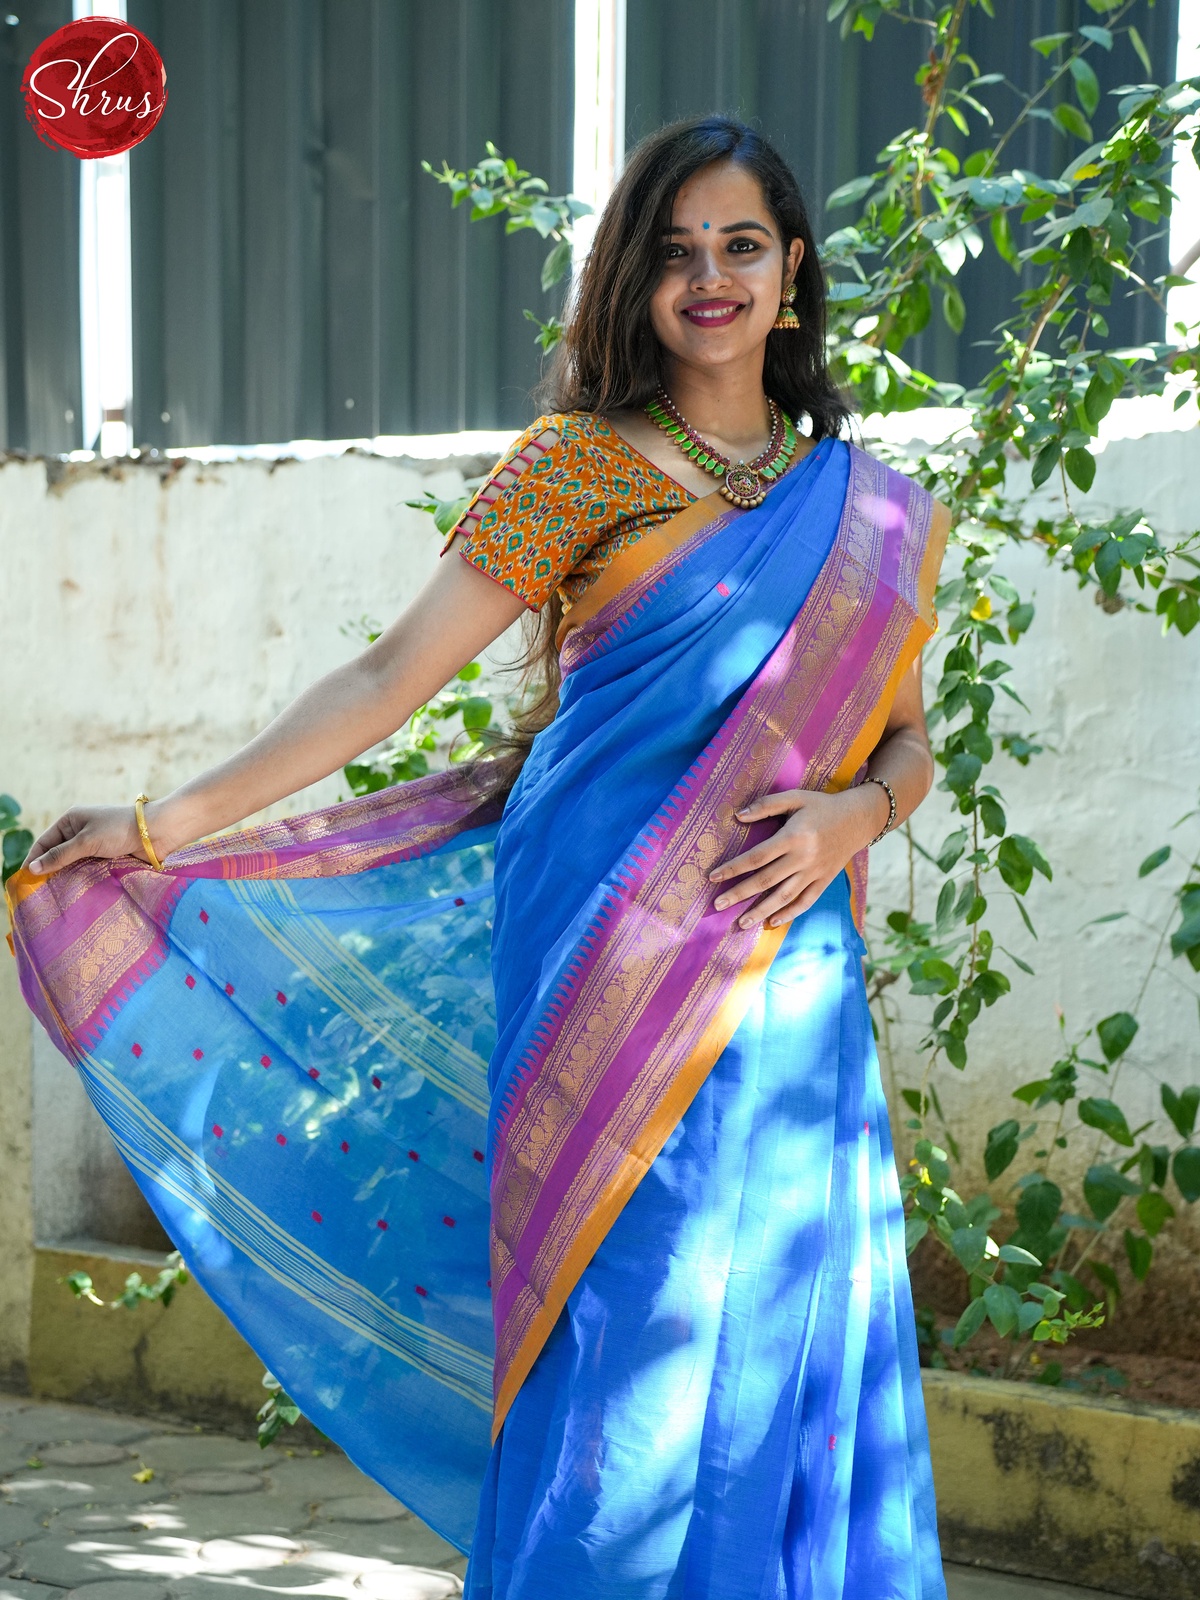 Discover the Best Quality Chettinad Cotton Sarees Online in India